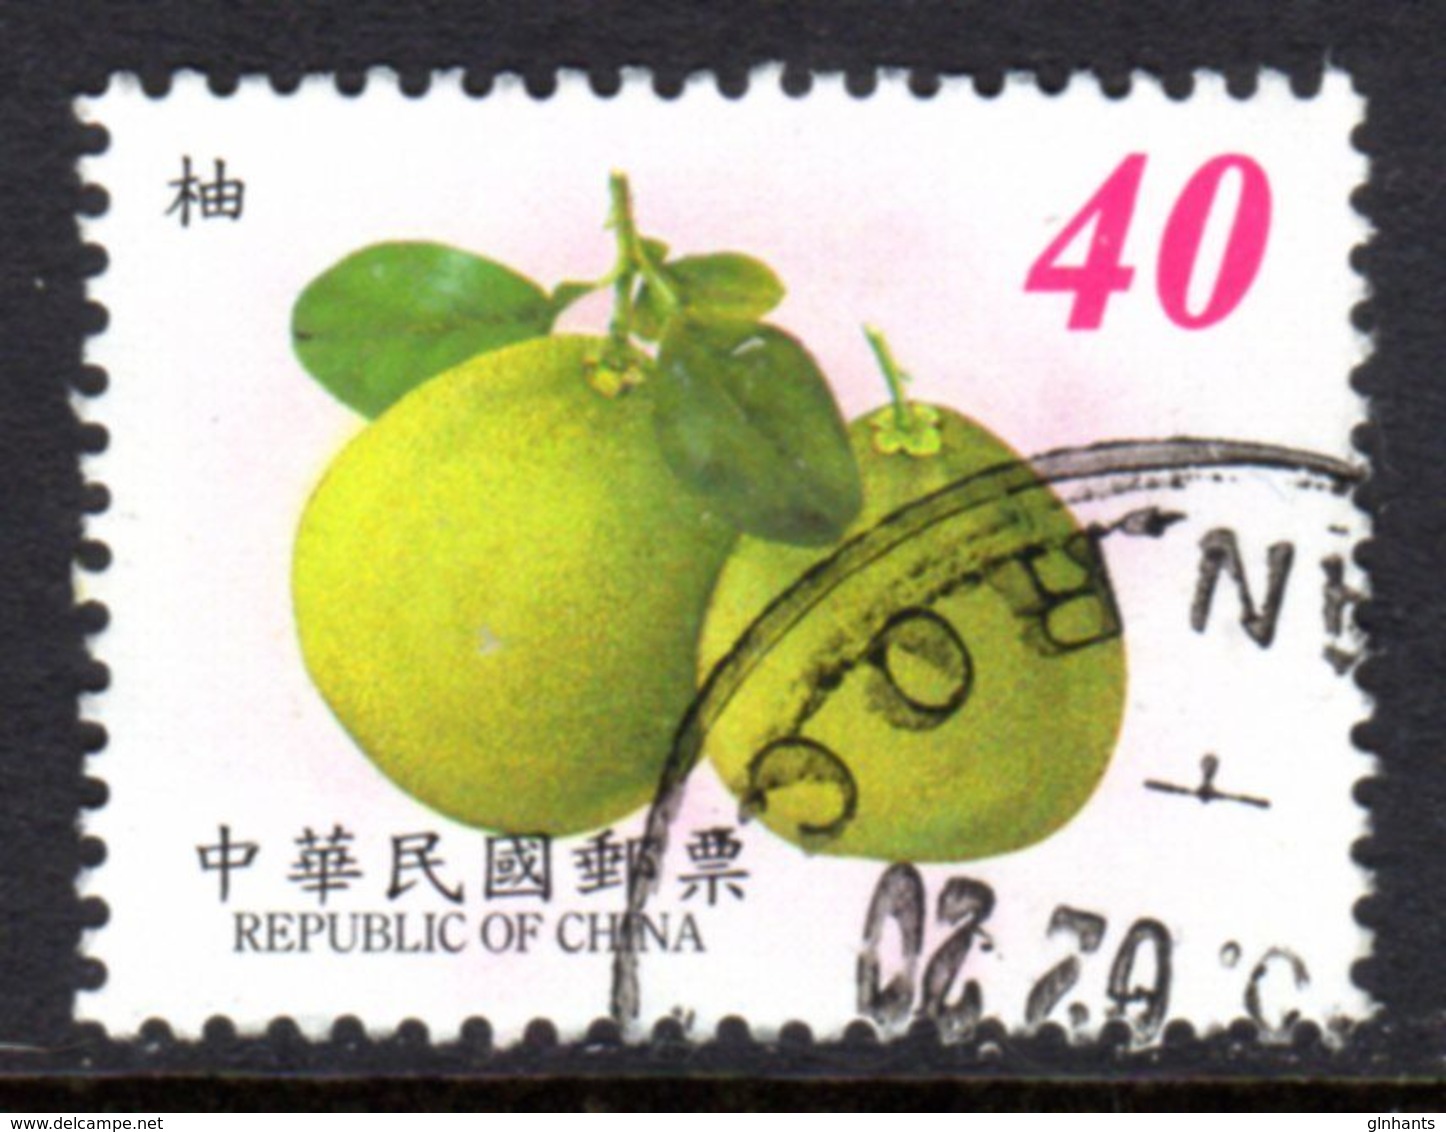 TAIWAN ROC - 2001 FRUITS 2nd SERIES $40 GRAPEFRUIT STAMP FINE USED SG 2735 - Used Stamps